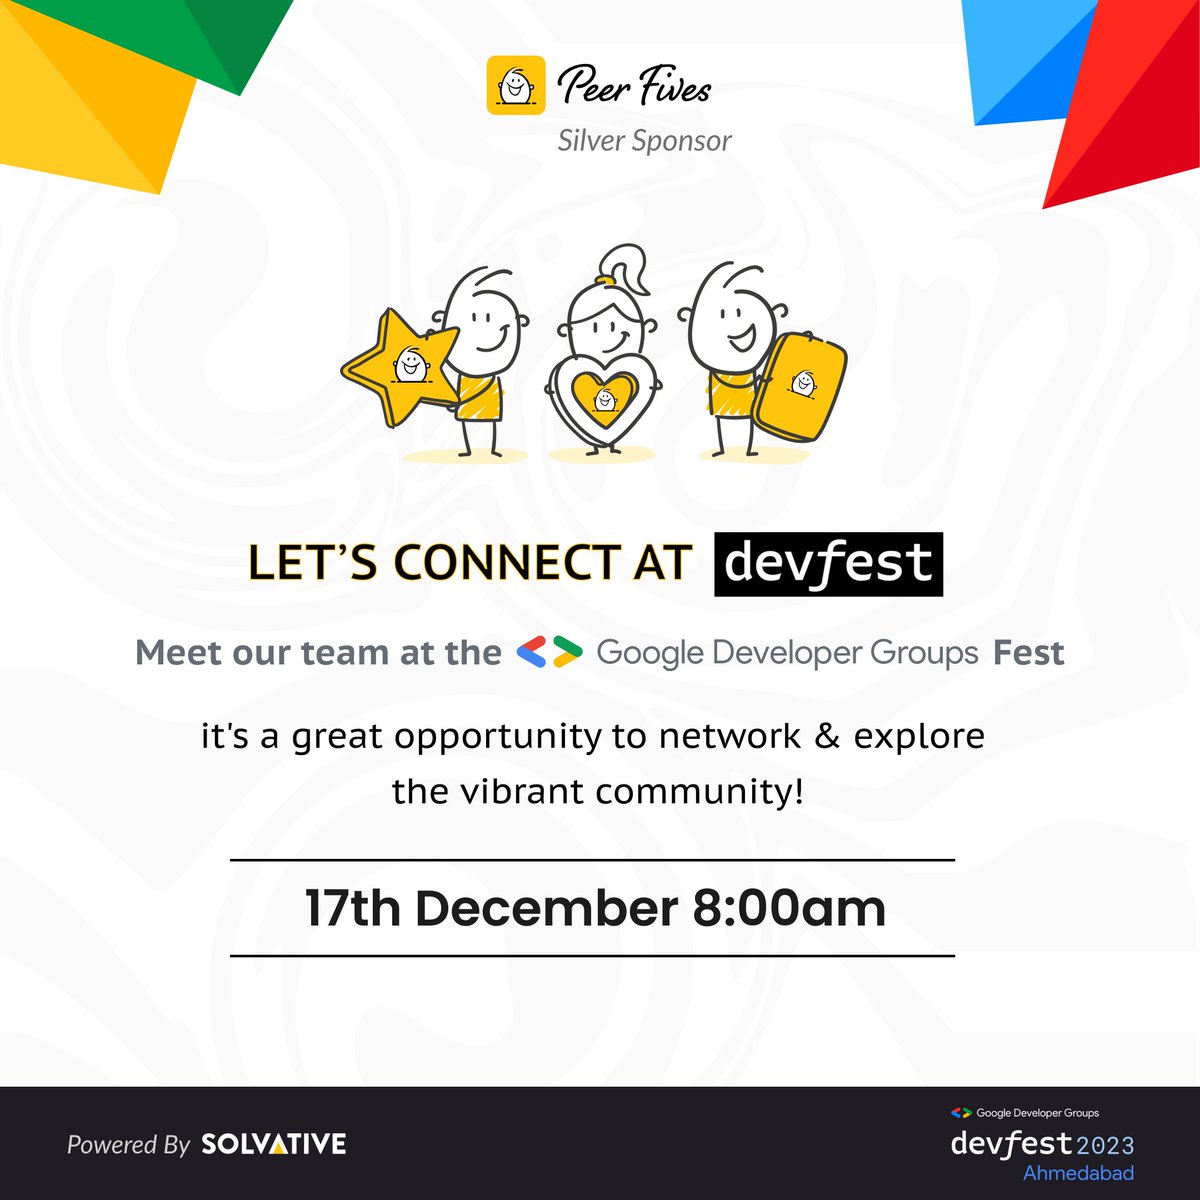 Don't miss the opportunity to meet the Peer Fives team at #devfest2023 in Ahmedabad! We're proud to be a Silver Sponsor and can't wait to connect with the Google Developer Groups community. See you there! #DevFestAhm #silversponsor #GDG #TechCommunity #DevFest2023 #Gratitude